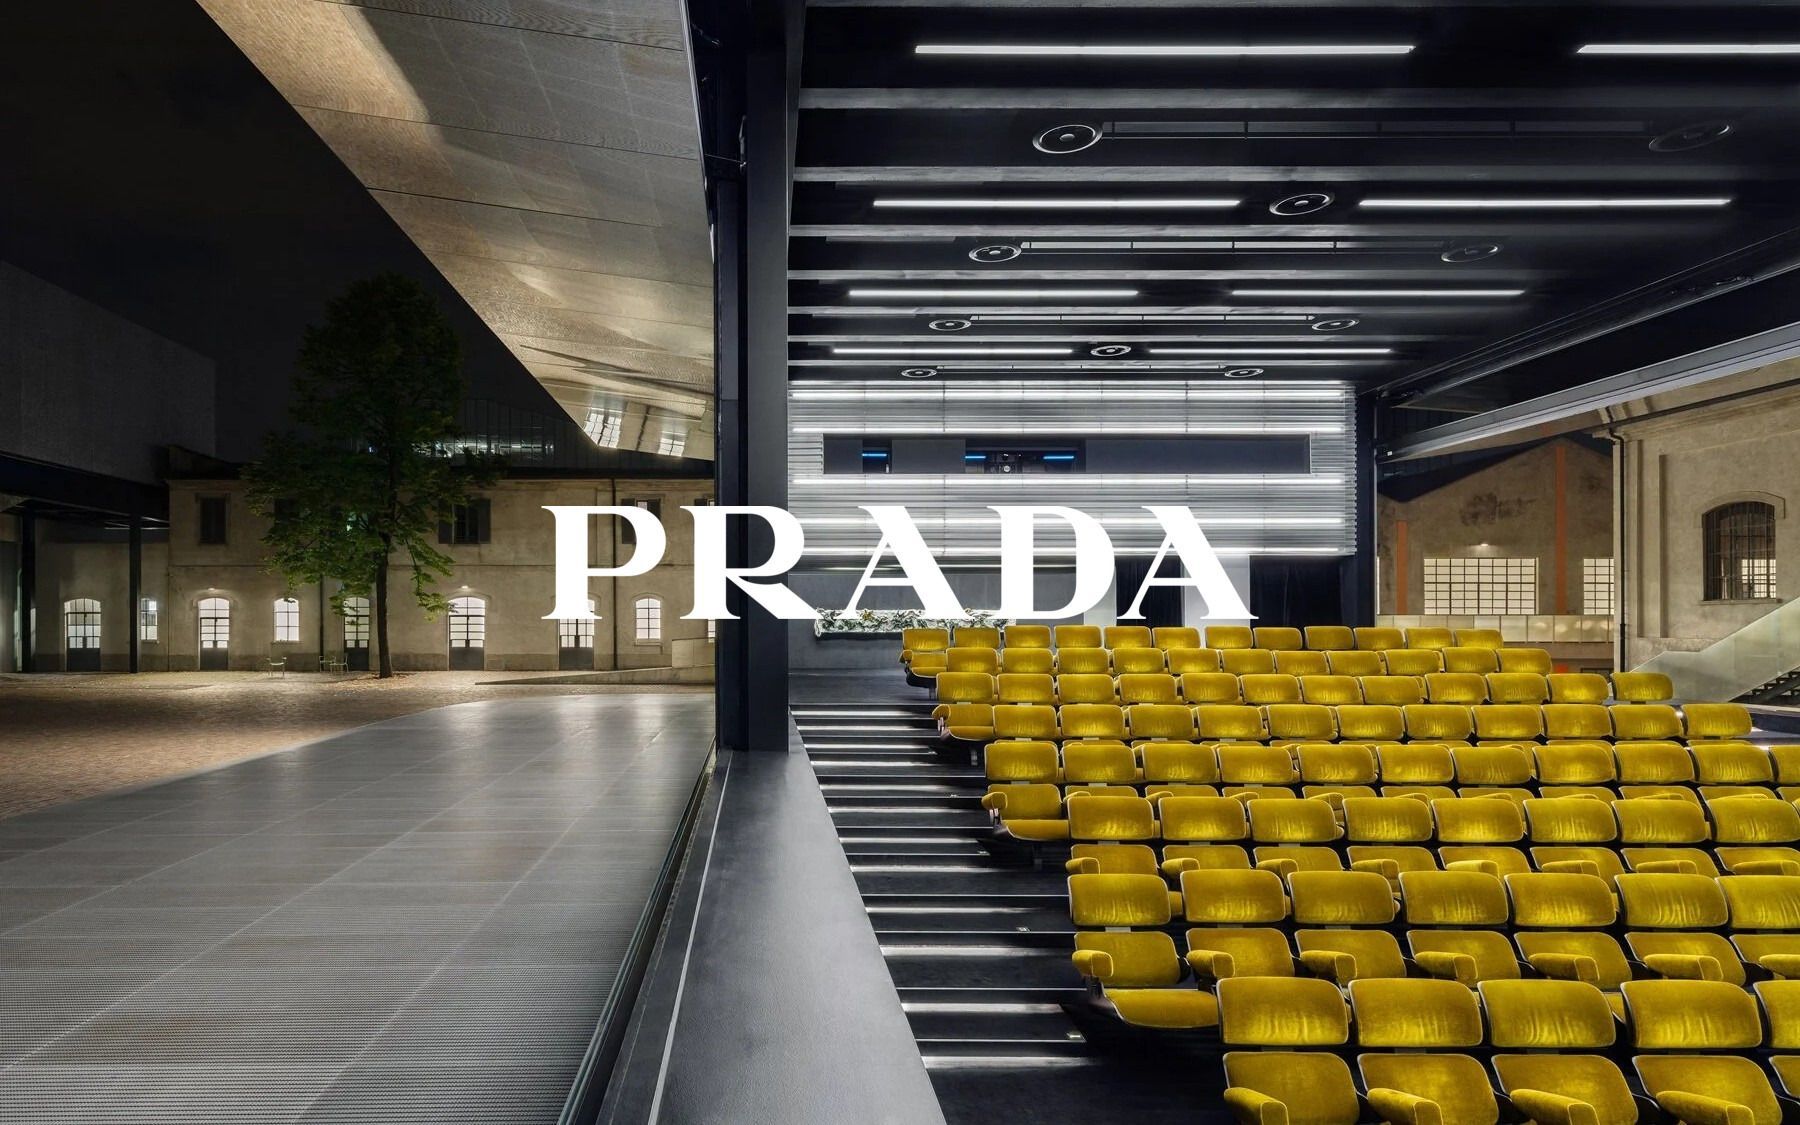 Fondazione Prada has opened its outdoor cinema in Milan Dedicated to the screening of the Multiple Canvases film series